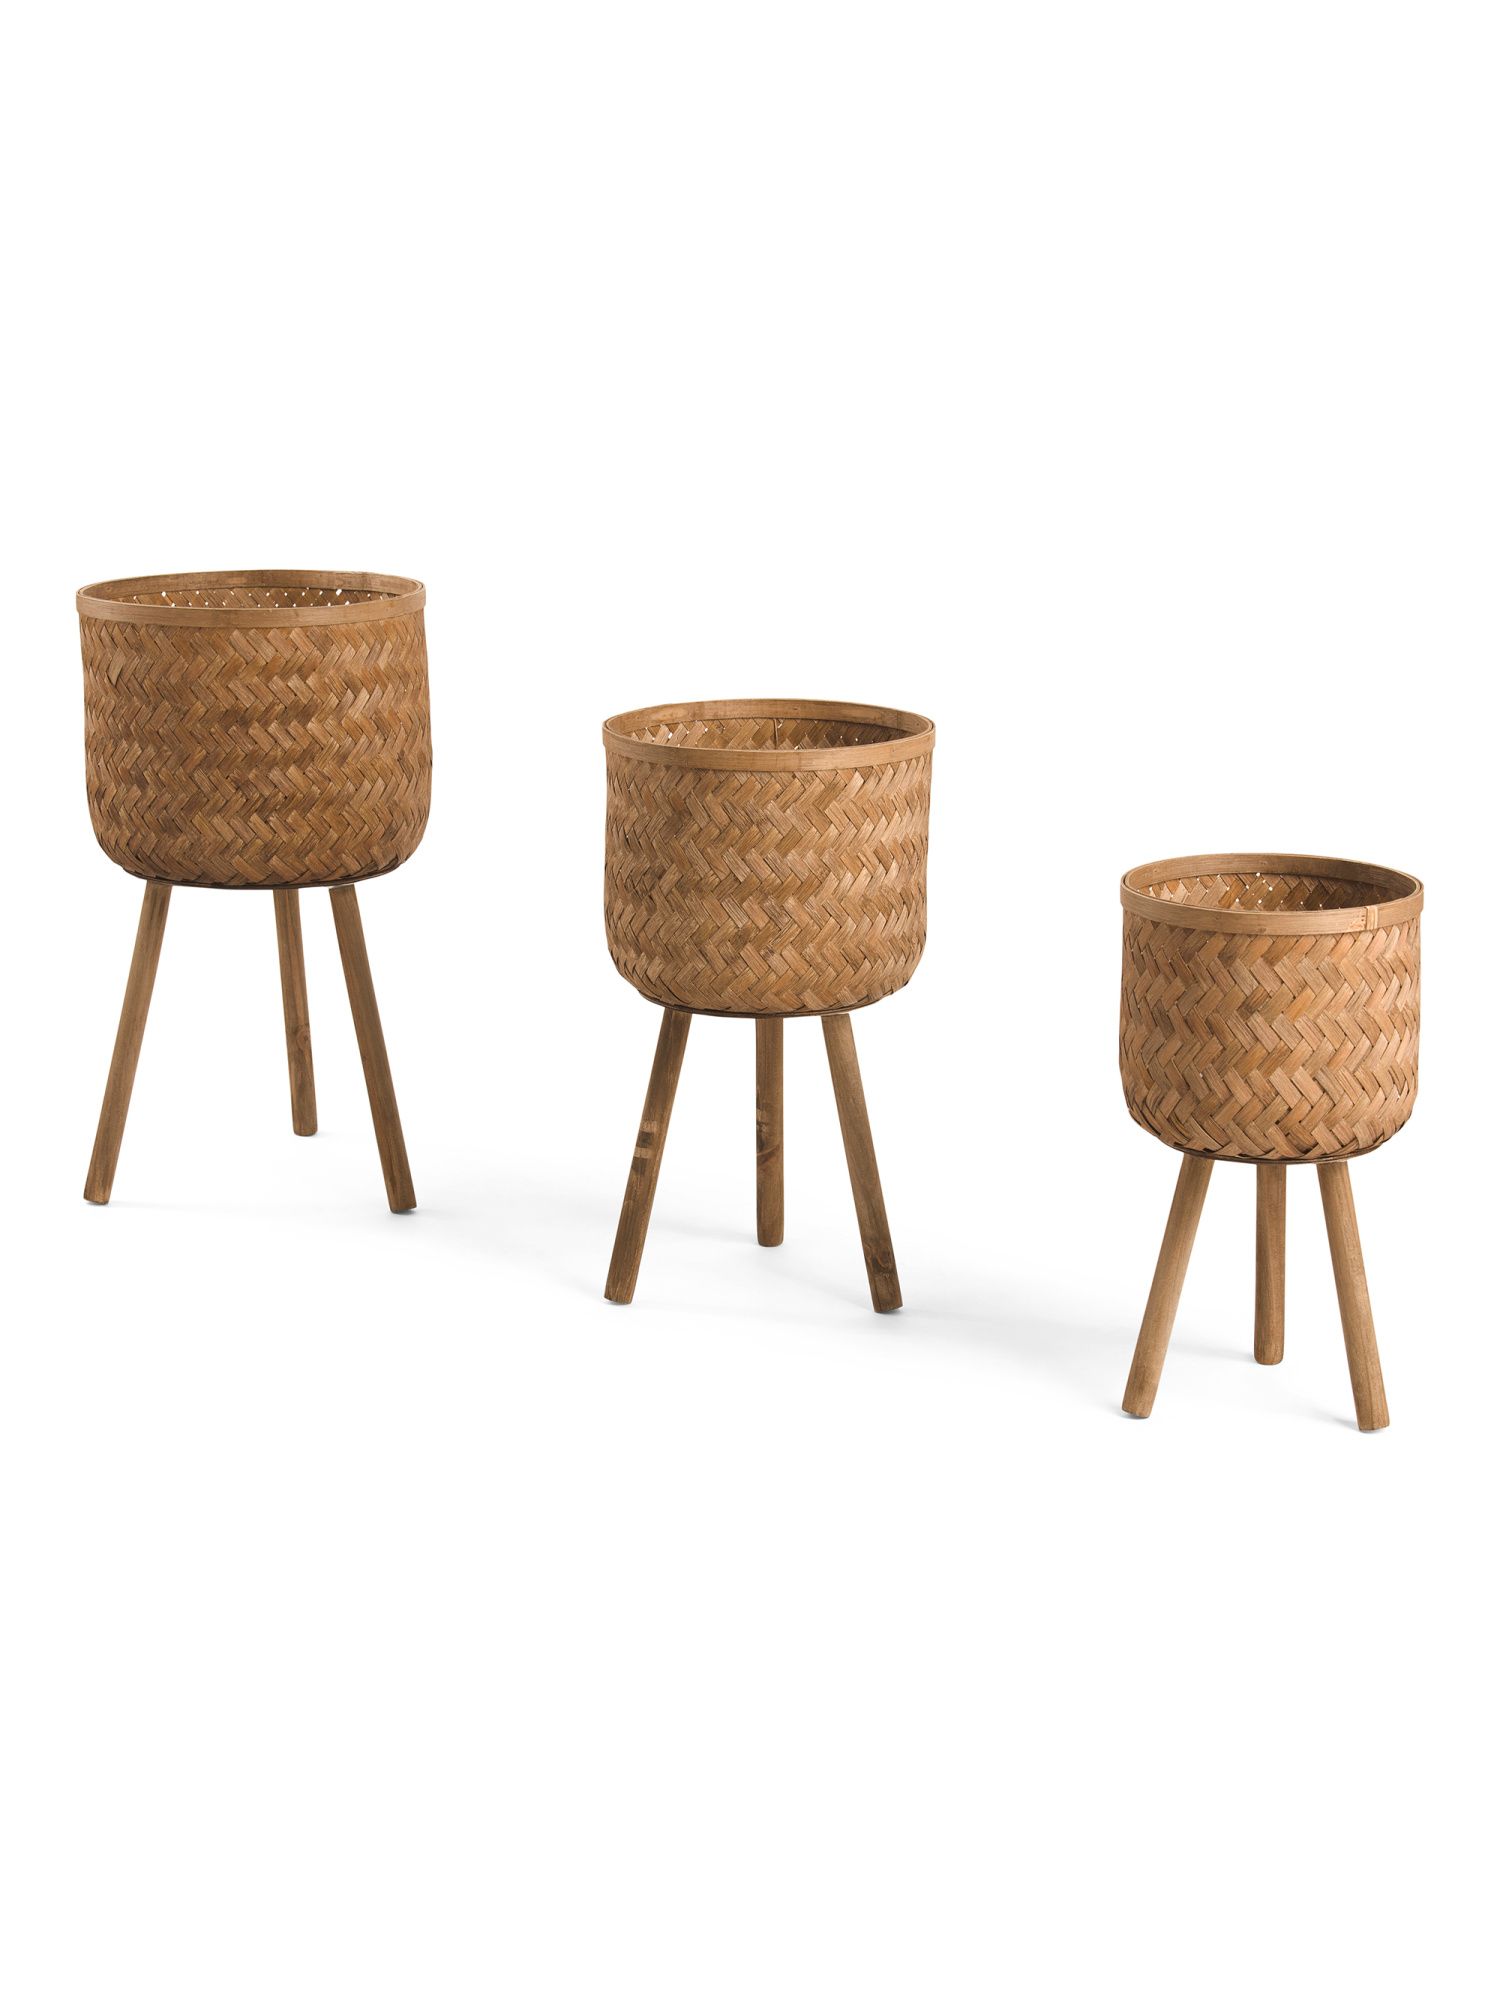 Set Of 3 Bamboo Planters On Stand | TJ Maxx